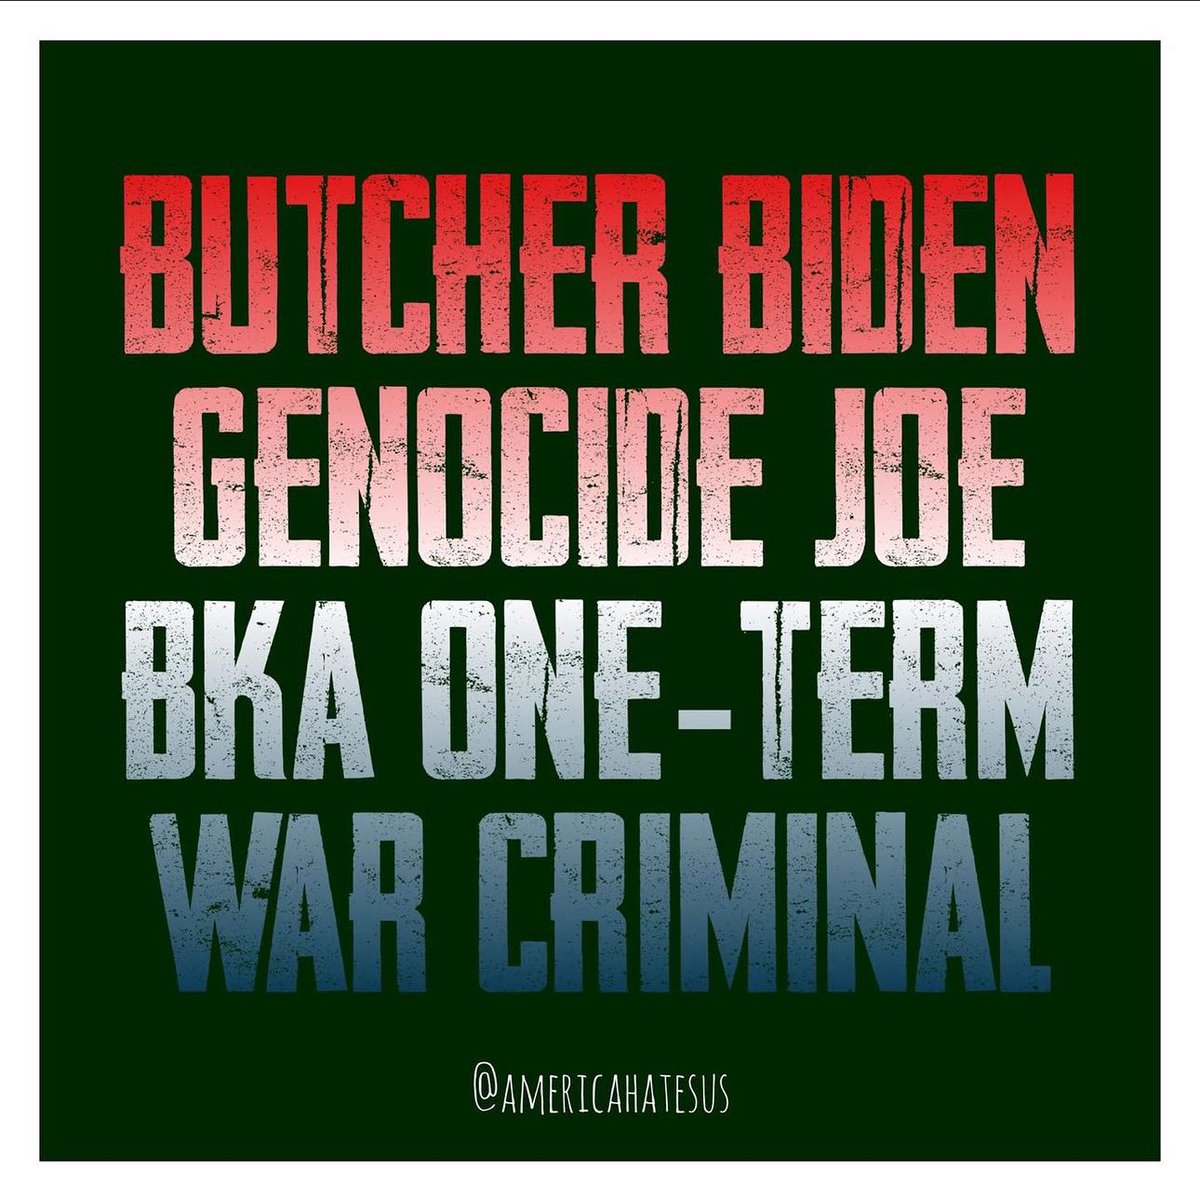 #GenocideJoe approves 1 billion for #Genocide He could have had a legacy of healthcare, taxing the rich, improving infrastructure, reigning in police but he picked the slaughtering of children America hates its citizens and #ButcherBiden is leading the way #UnitedStatesOfIsrael